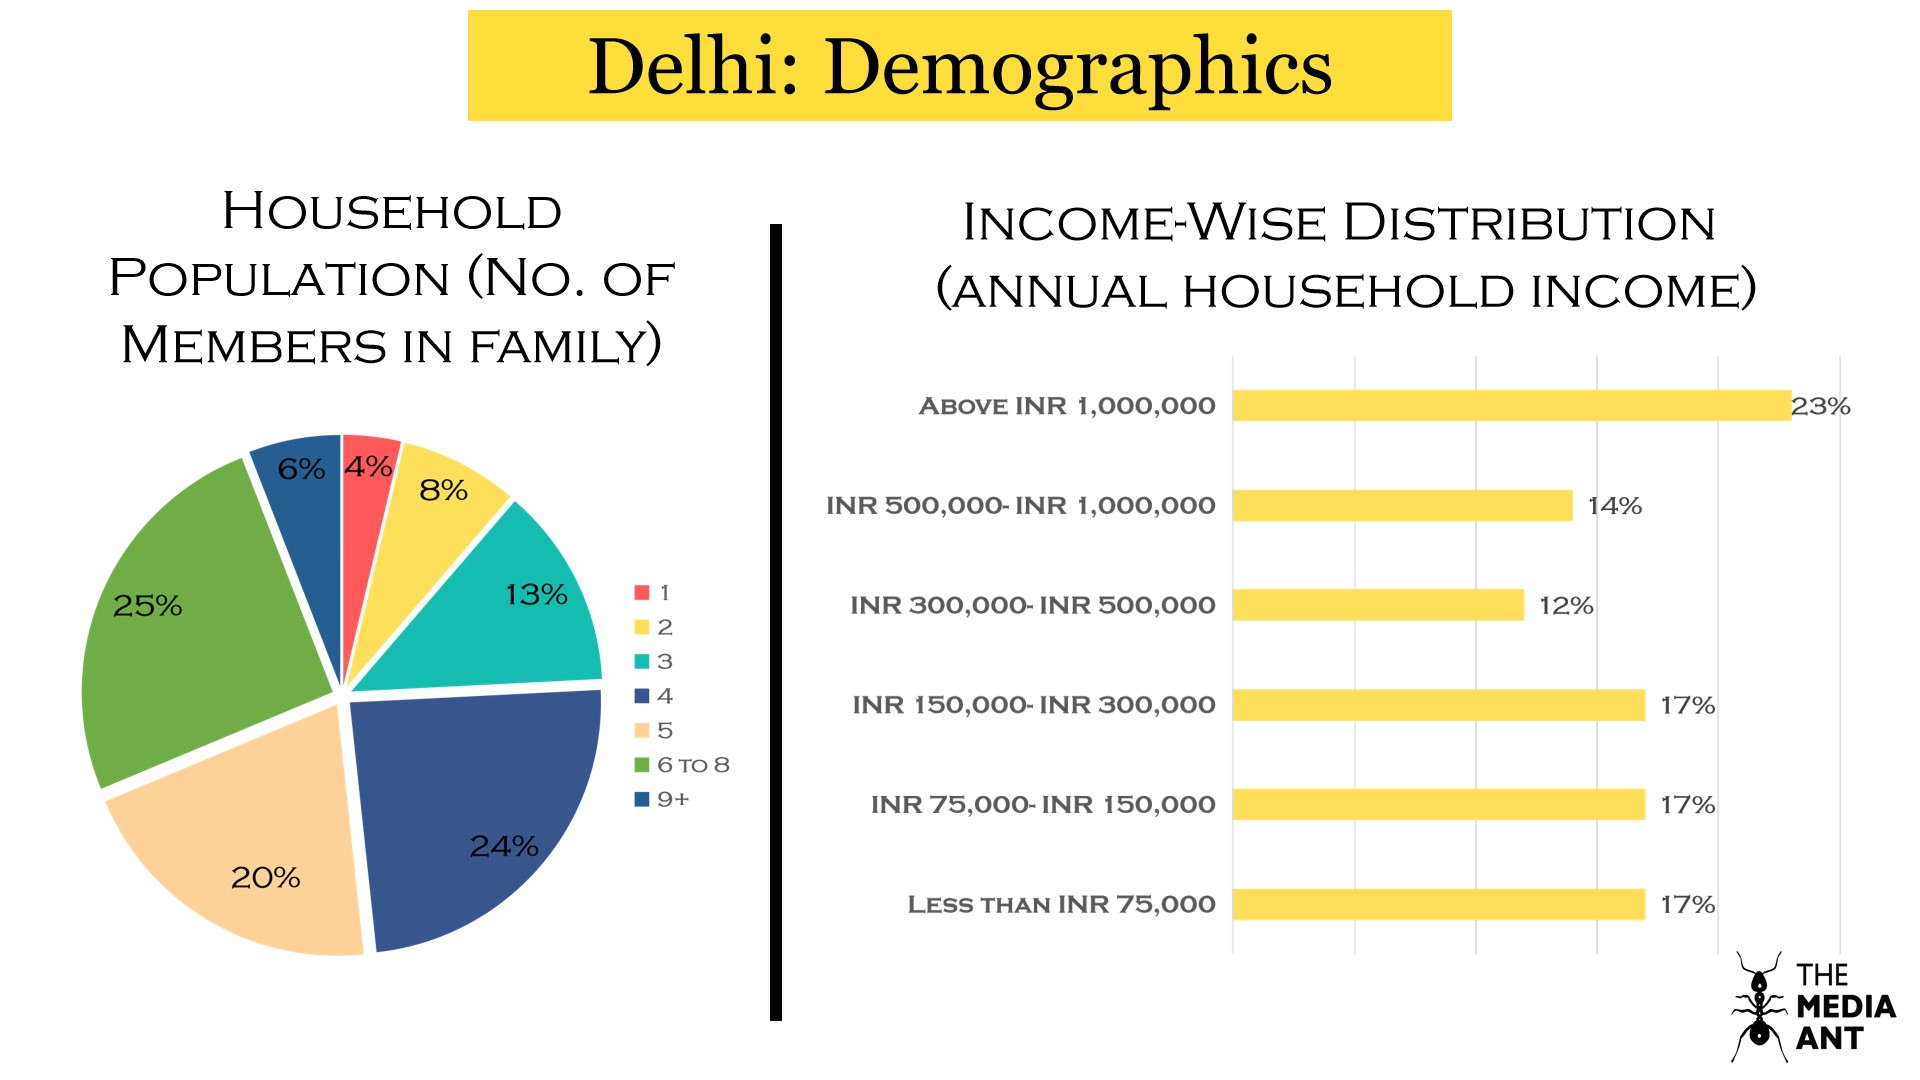 Delhi household population and income-wise distribution